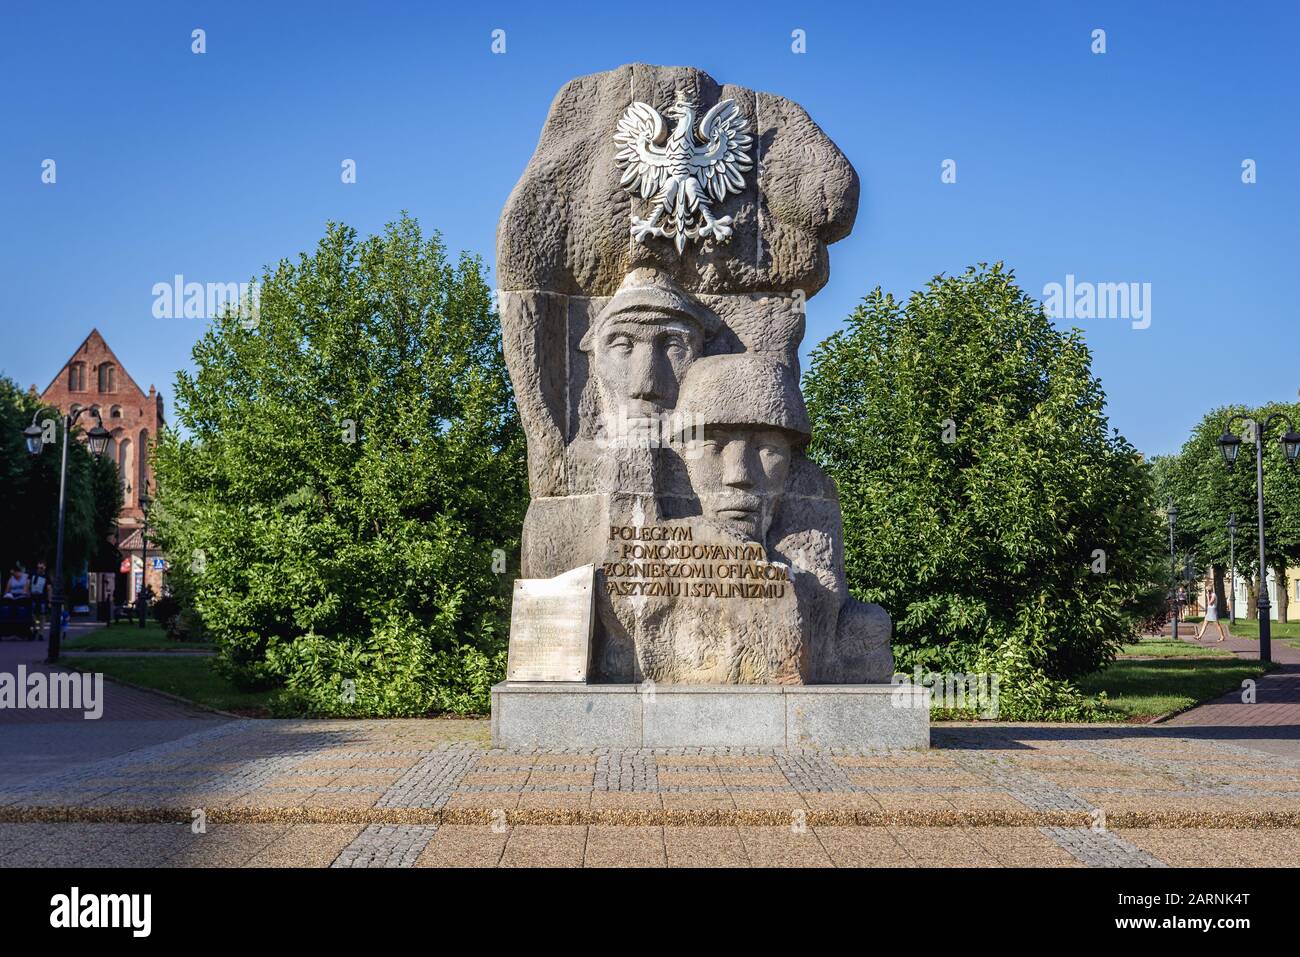 Memorial to the fallen and murdered soldiers and to the victims of Fascism and Stalinism in Swidwin, West Pomeranian Voivodeship of Poland Stock Photo